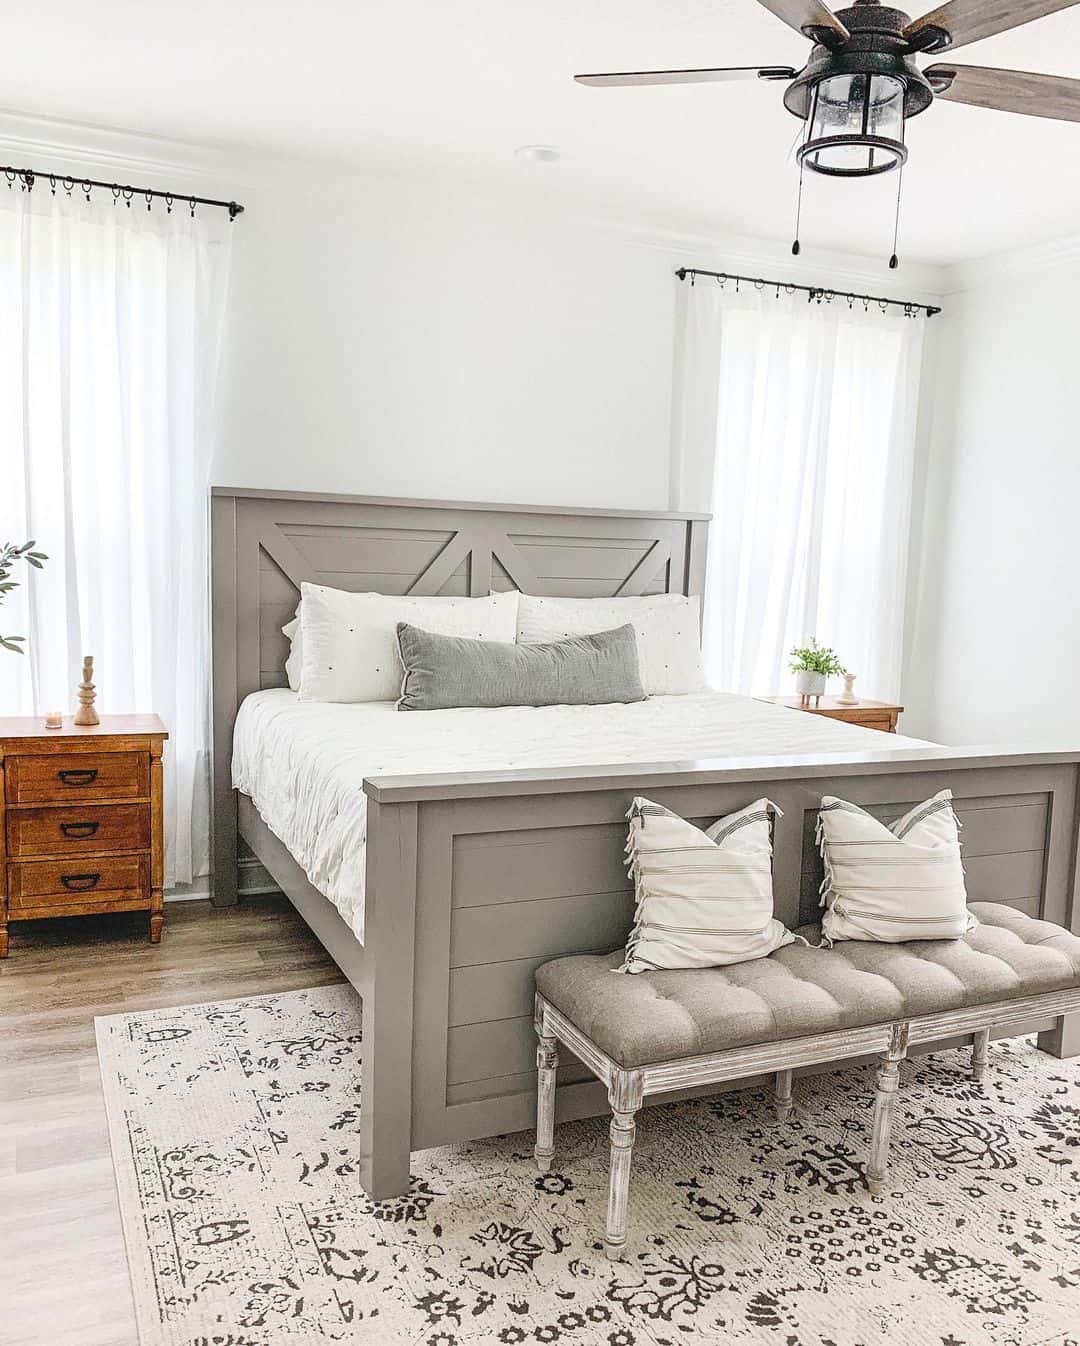 Modern Farmhouse Bedroom Incorporating Rustic Elements